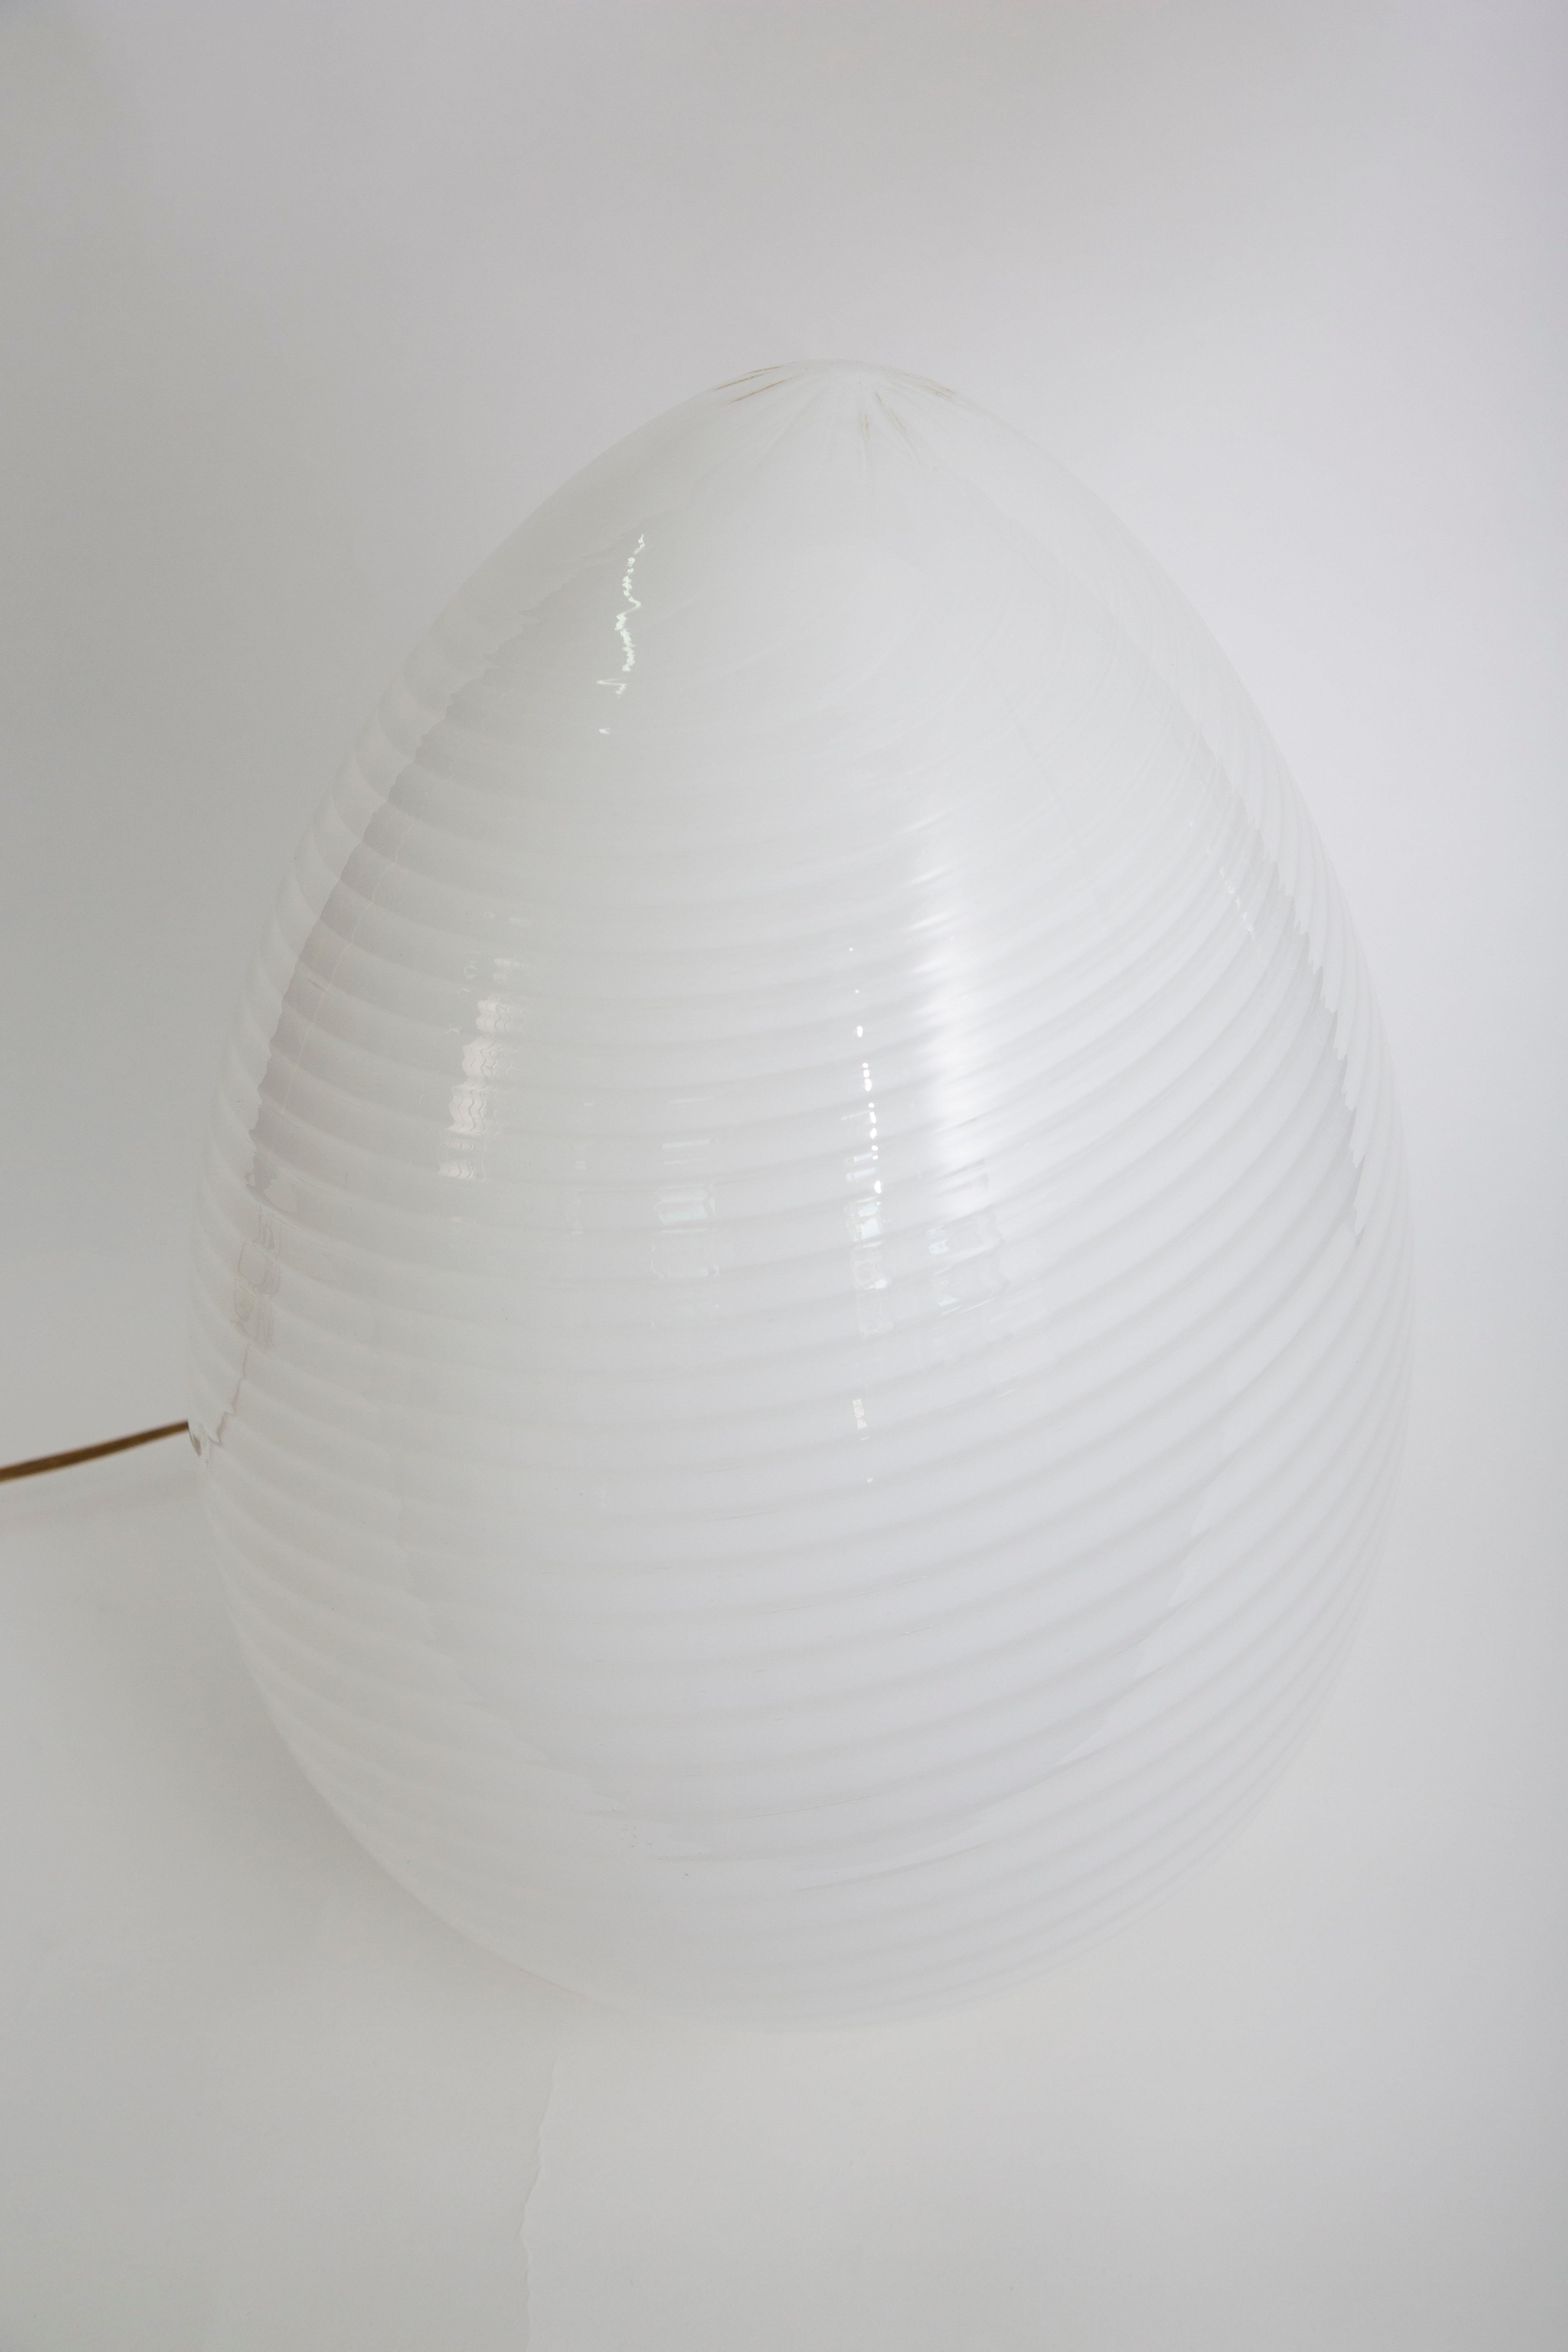 Gorgeous pair of Murano egg lamps by Vetri.